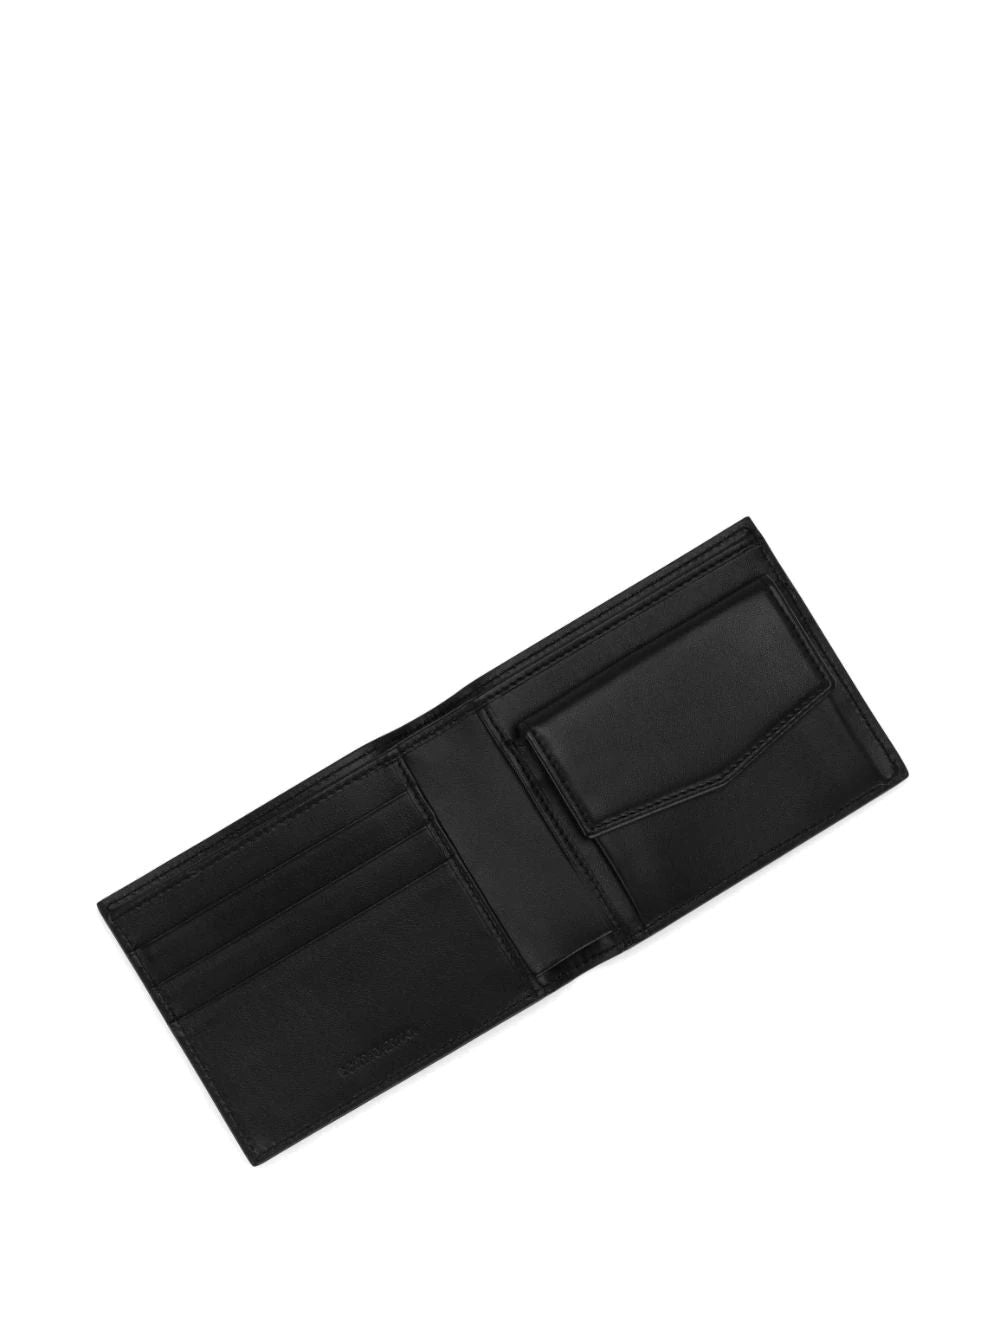 leather wallet with logo print